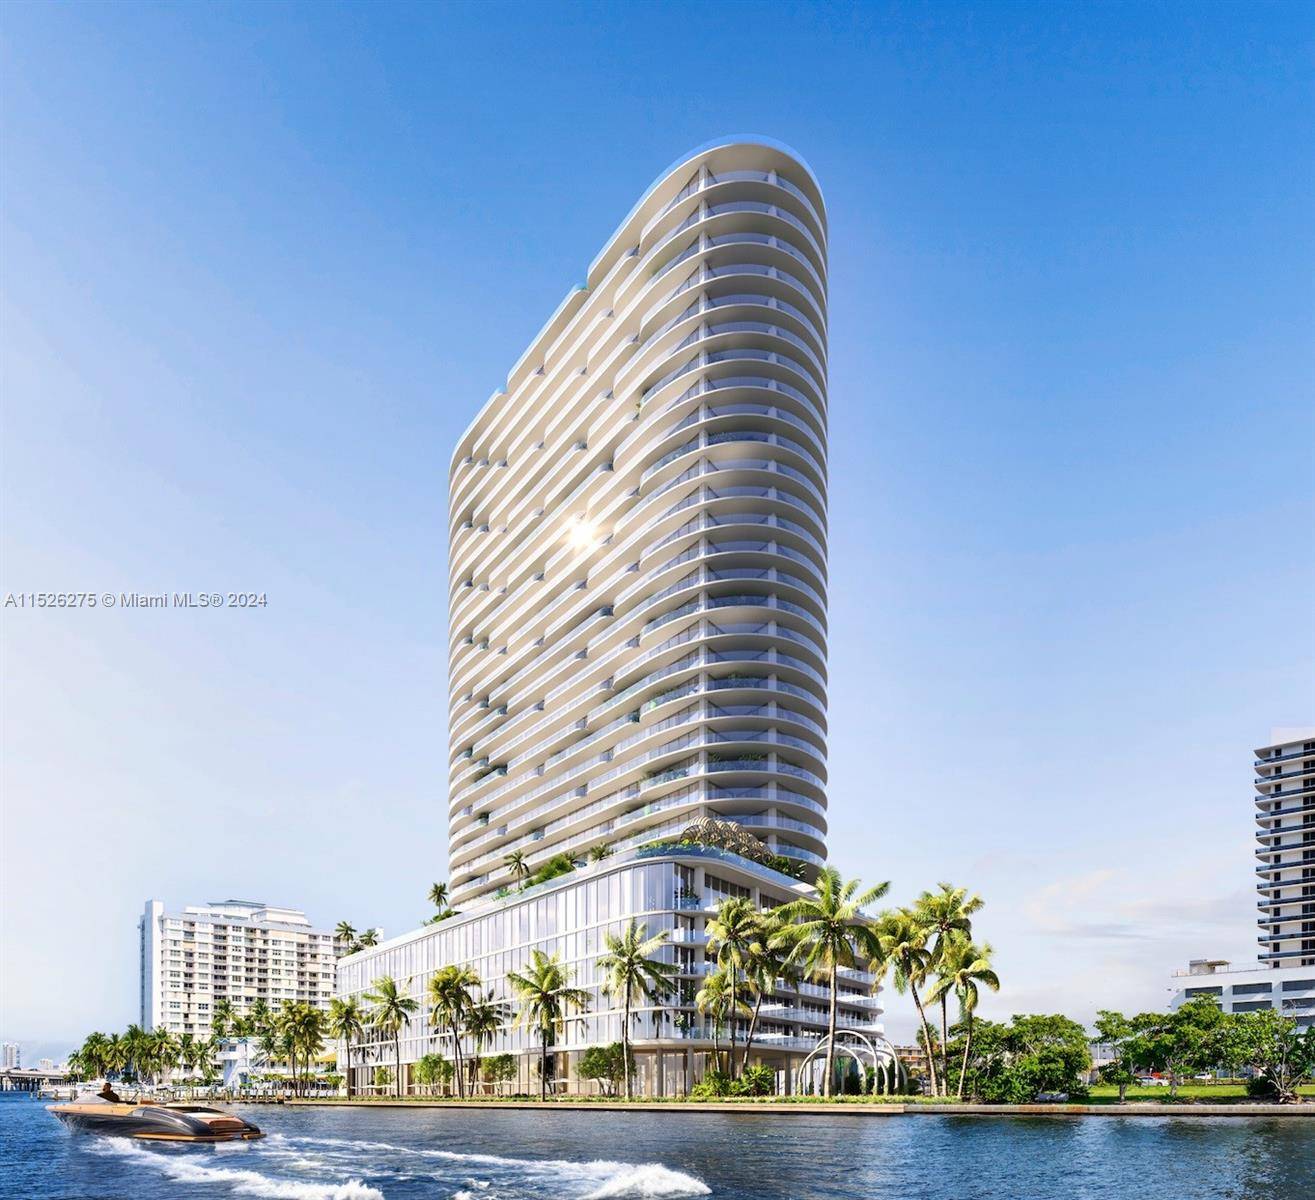 Introducing Continuum Club Residences, a prestigious enclave of 198 meticulously crafted residences and penthouses, poised to rival the renowned Continuum South Beach.